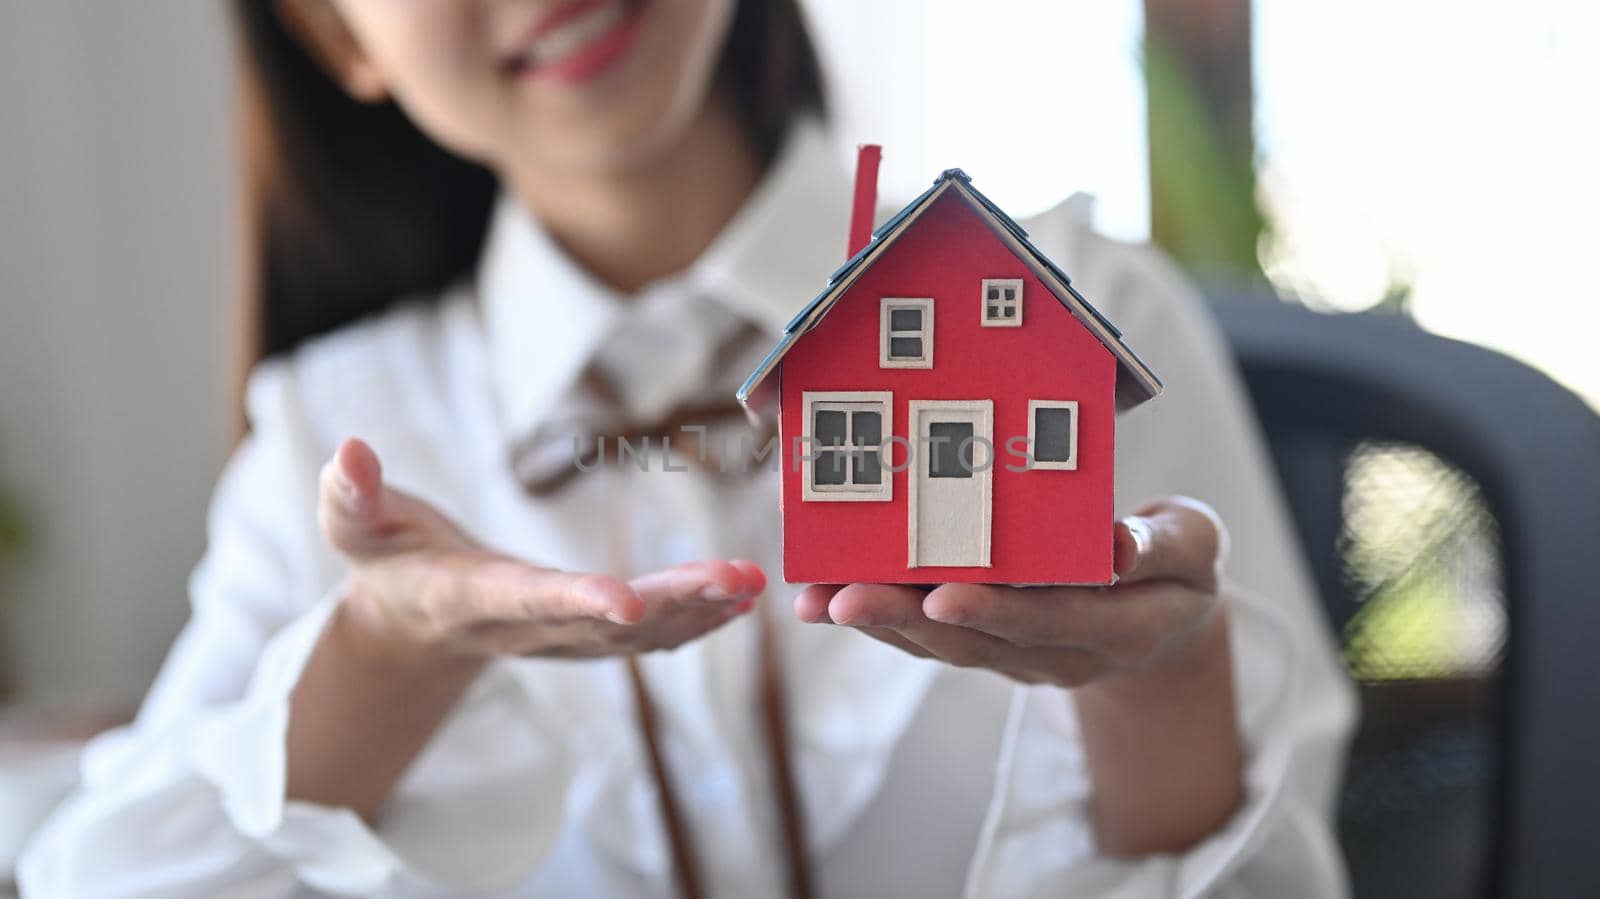 Woman holding and showing house model. Real estate investment and insurance concept.